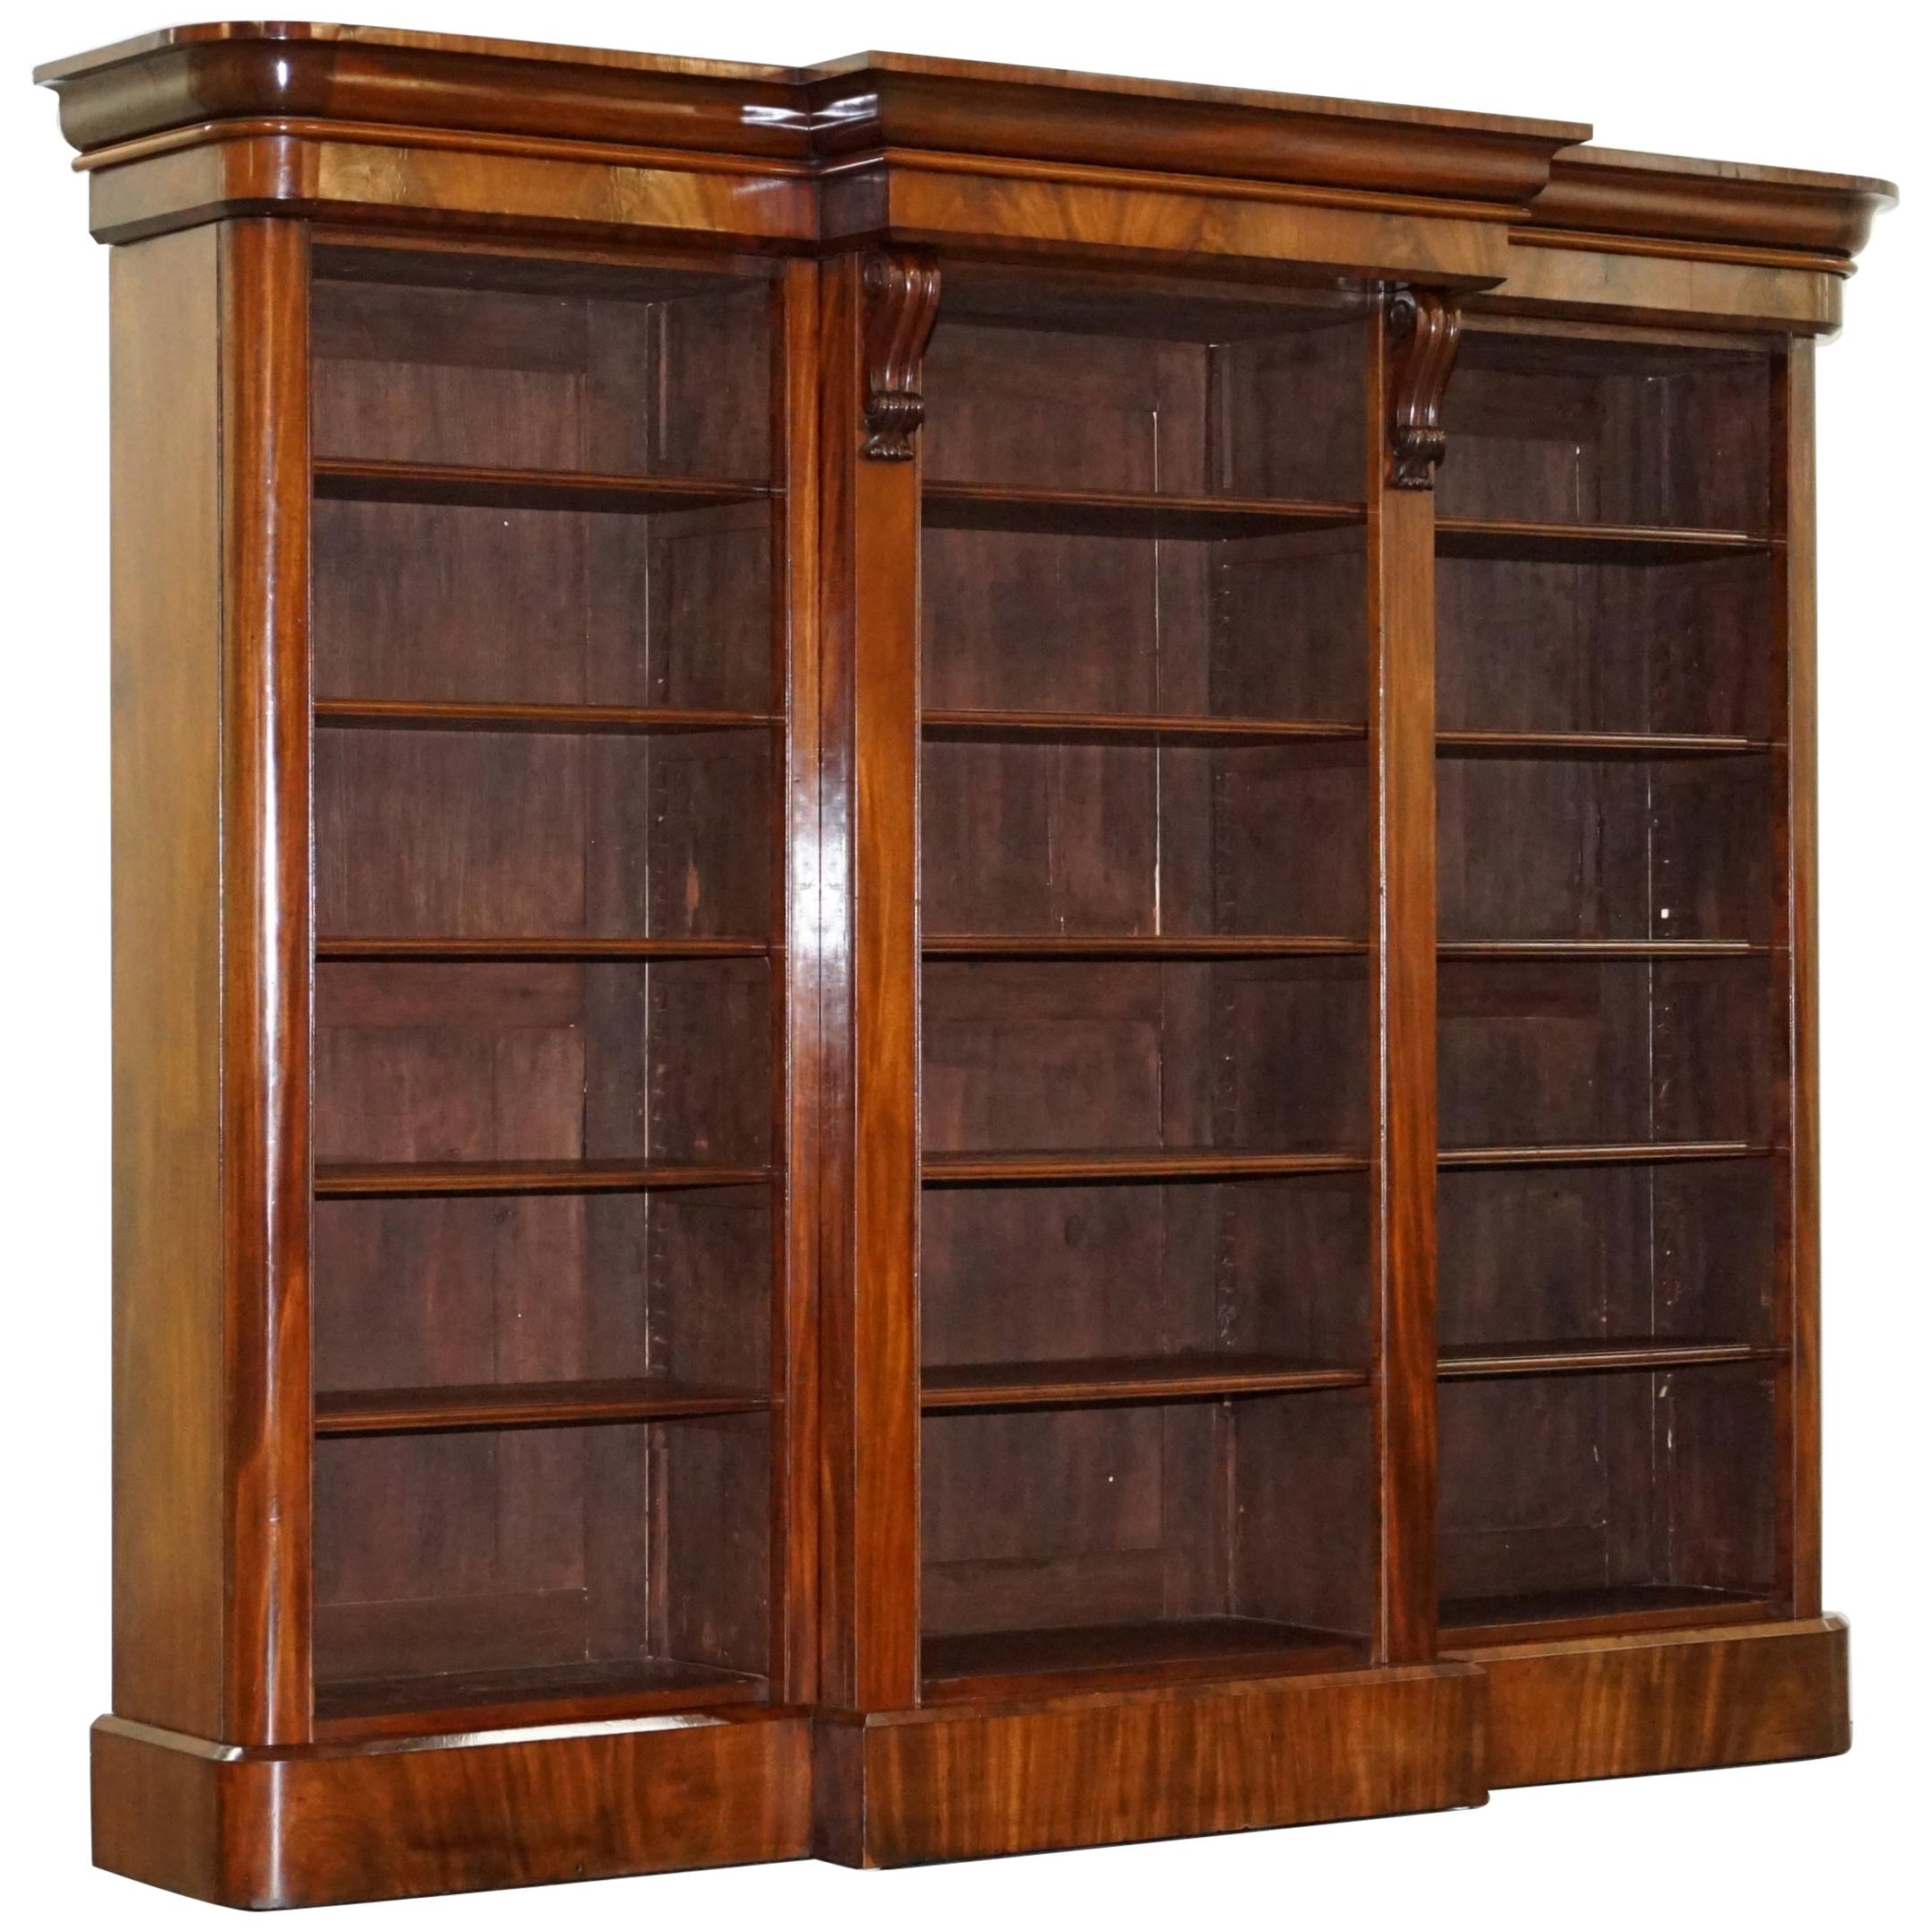 Fully Restored Victorian circa 1860 Hardwood Library Open Breakfront Bookcase